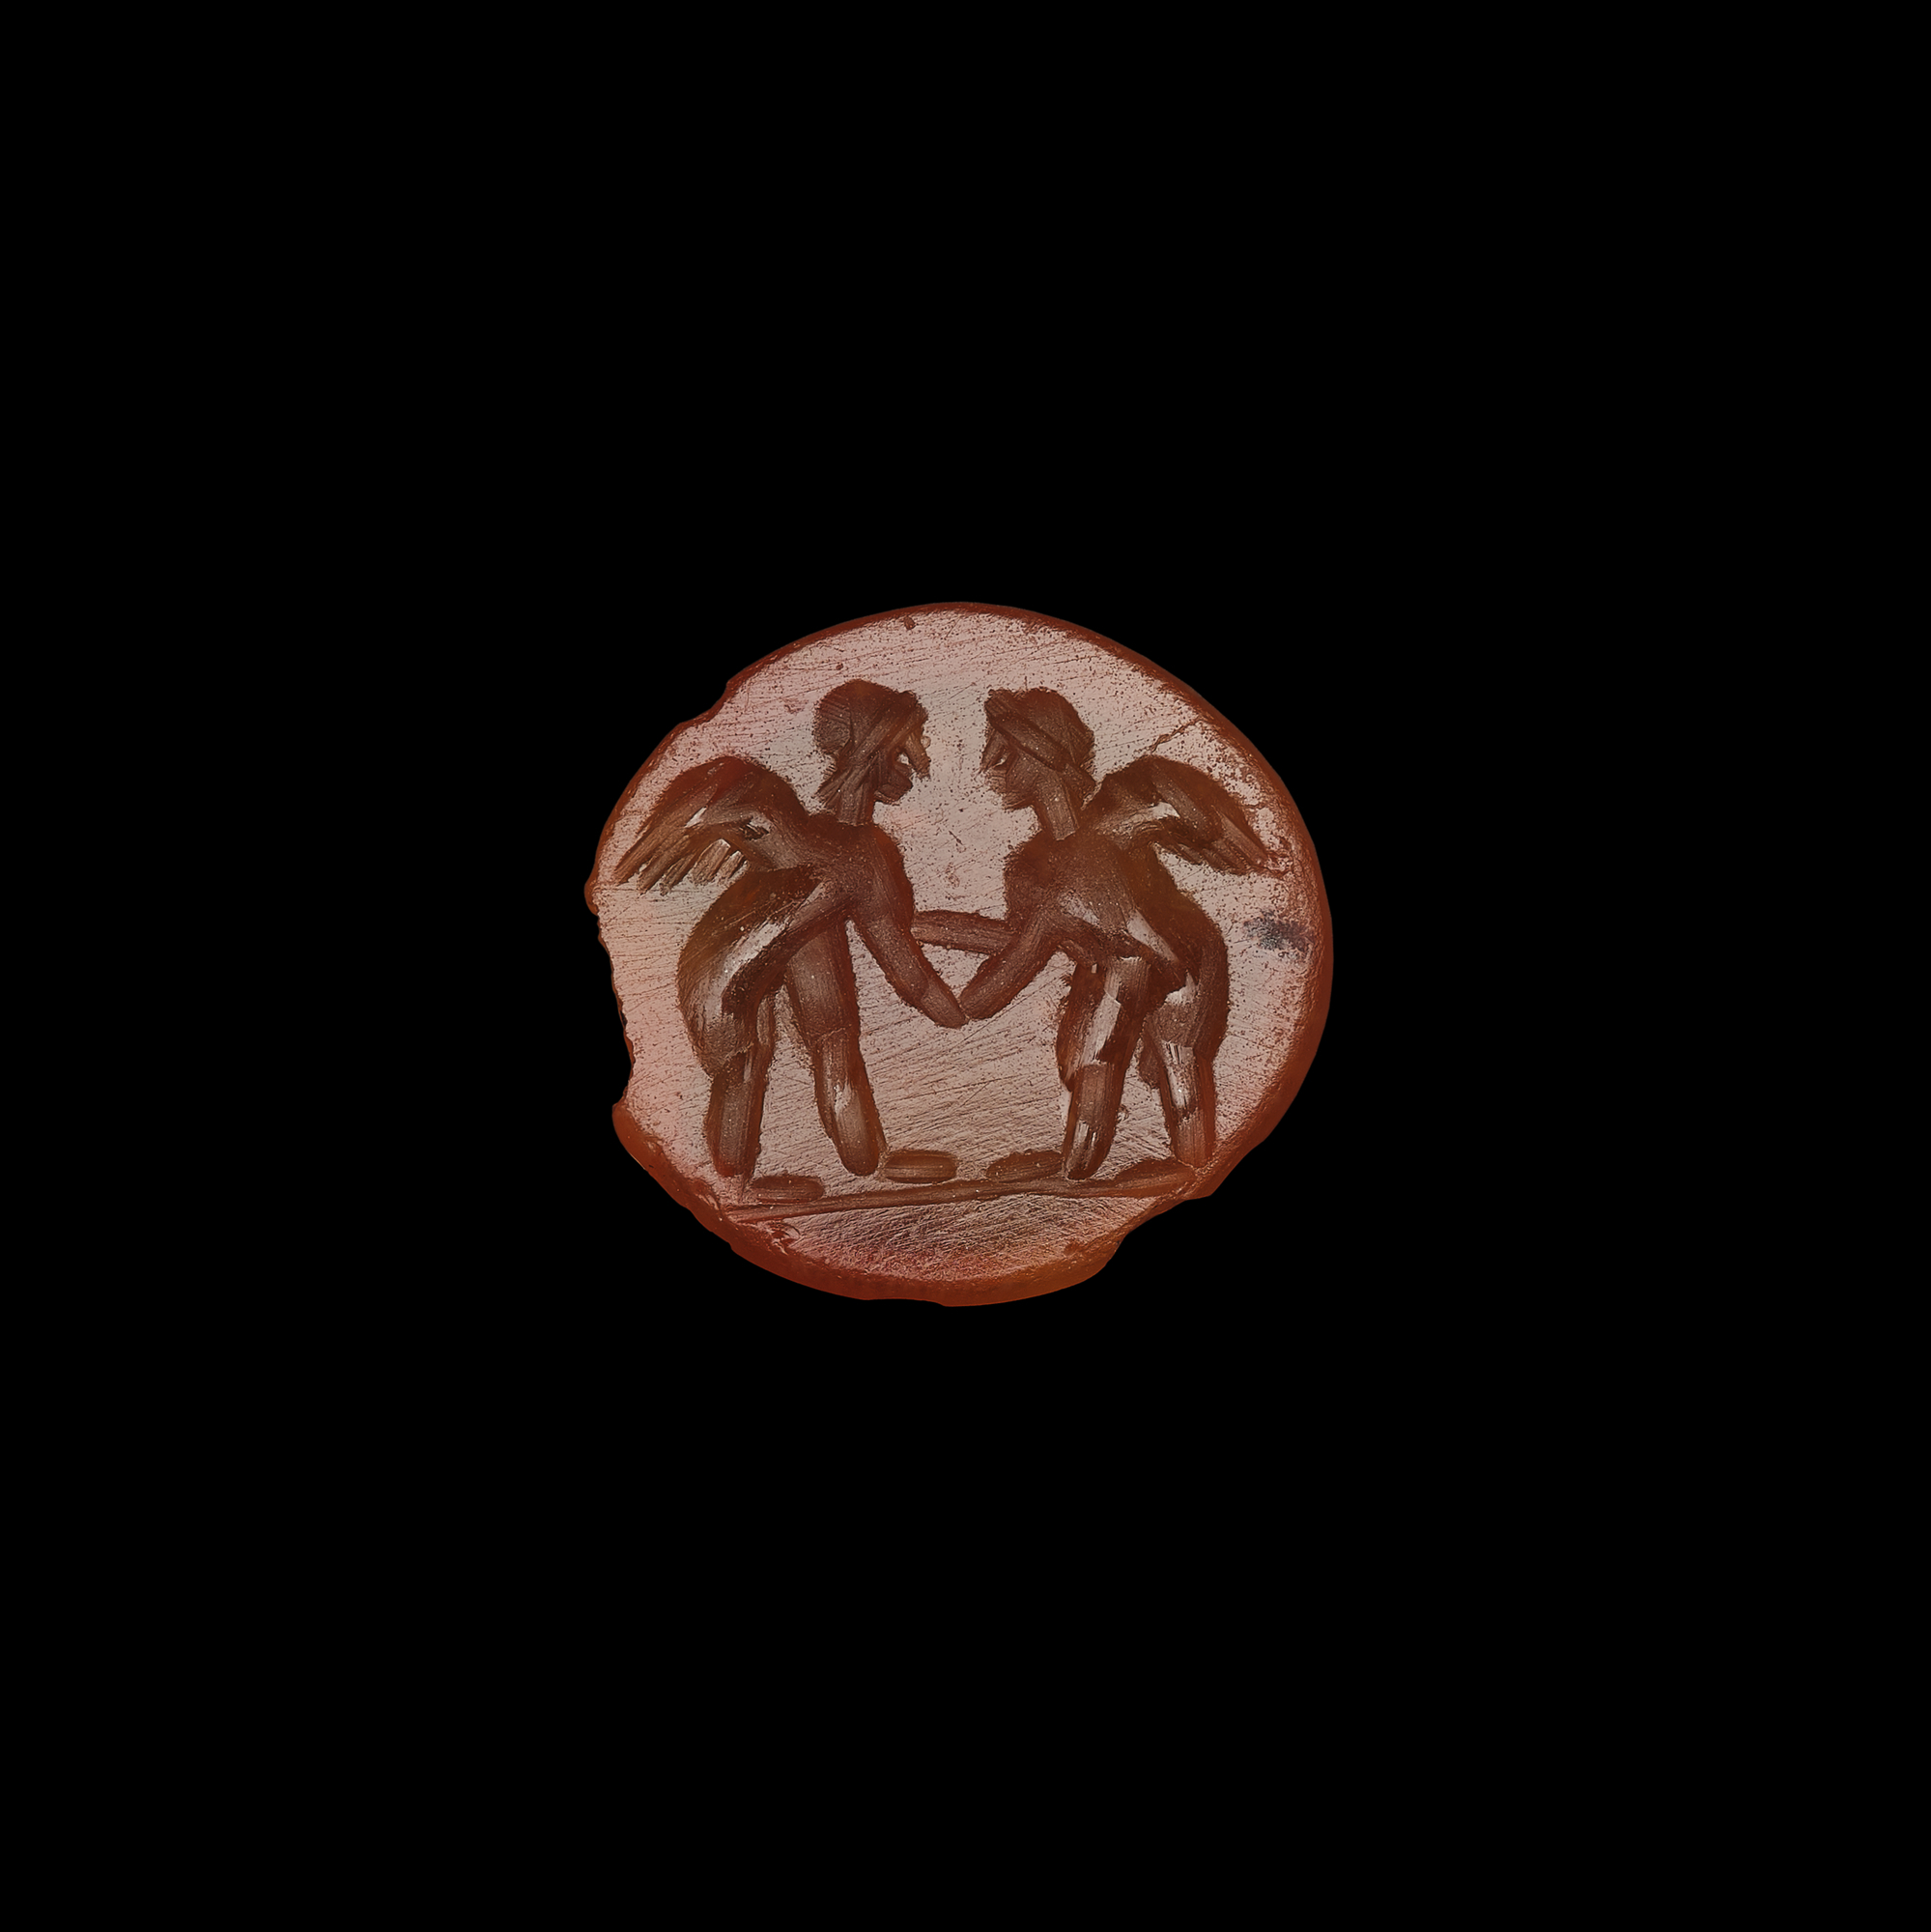 Image of Cornelian intaglio showing two cupids wrestling, cap-with-rim style, 2nd century, part of the Cruickshank collection of finds from Newstead, Roxburghshire © National Museums Scotland